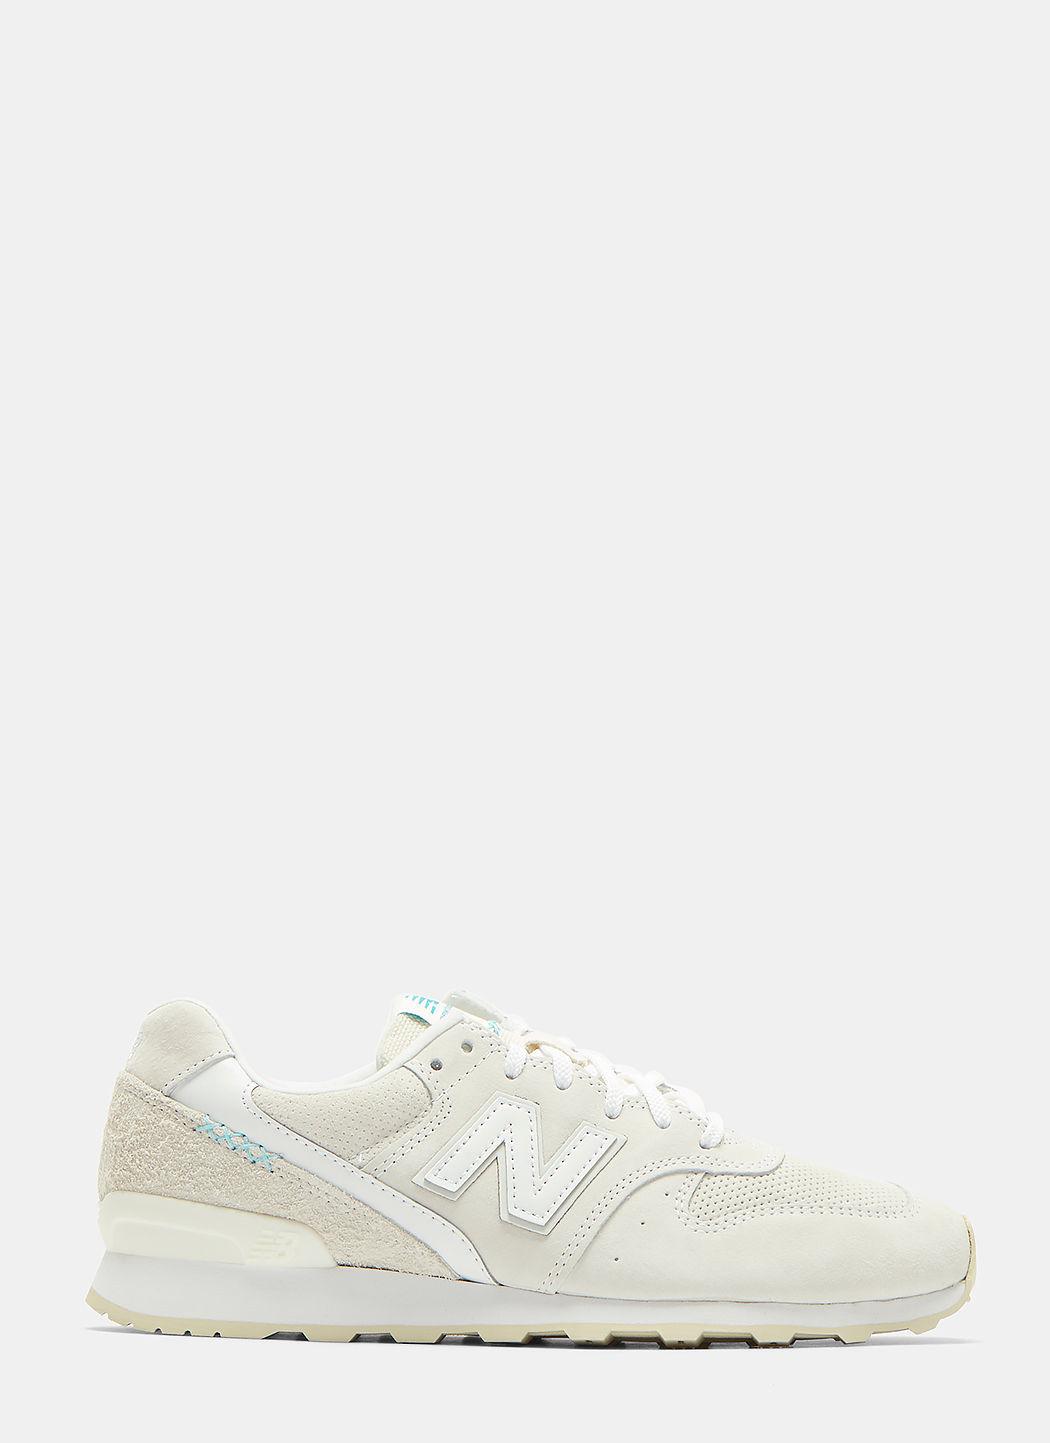 New Balance 996 Textured And Perforated Suede Sneakers In Off ...